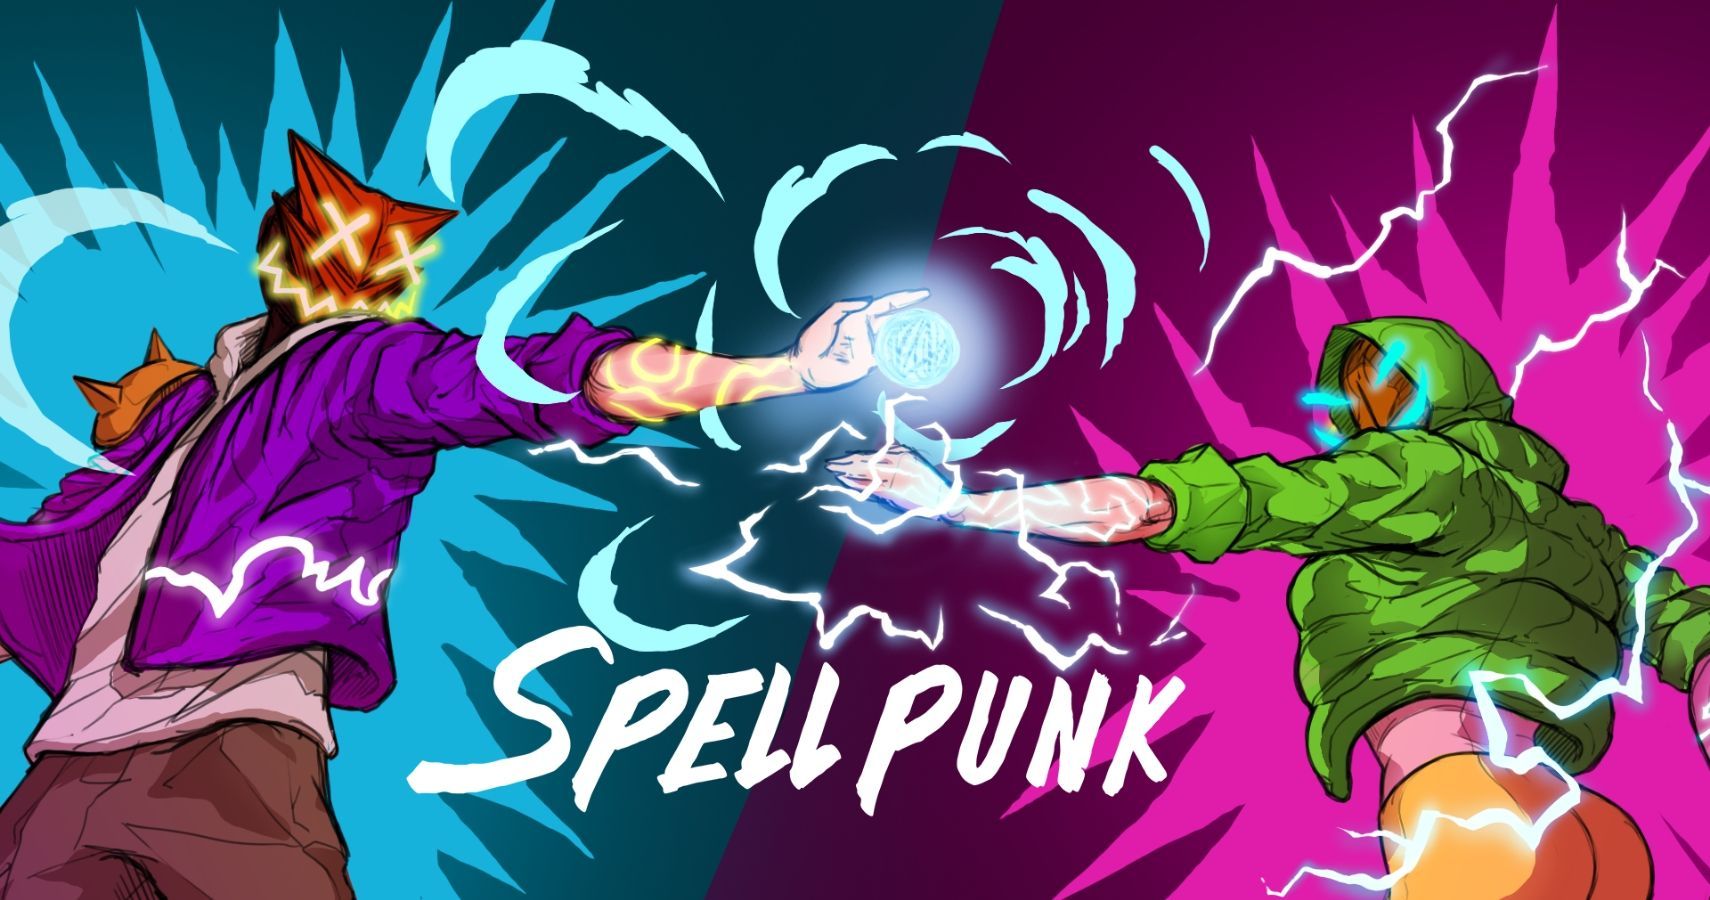 SpellPunk VR feature image